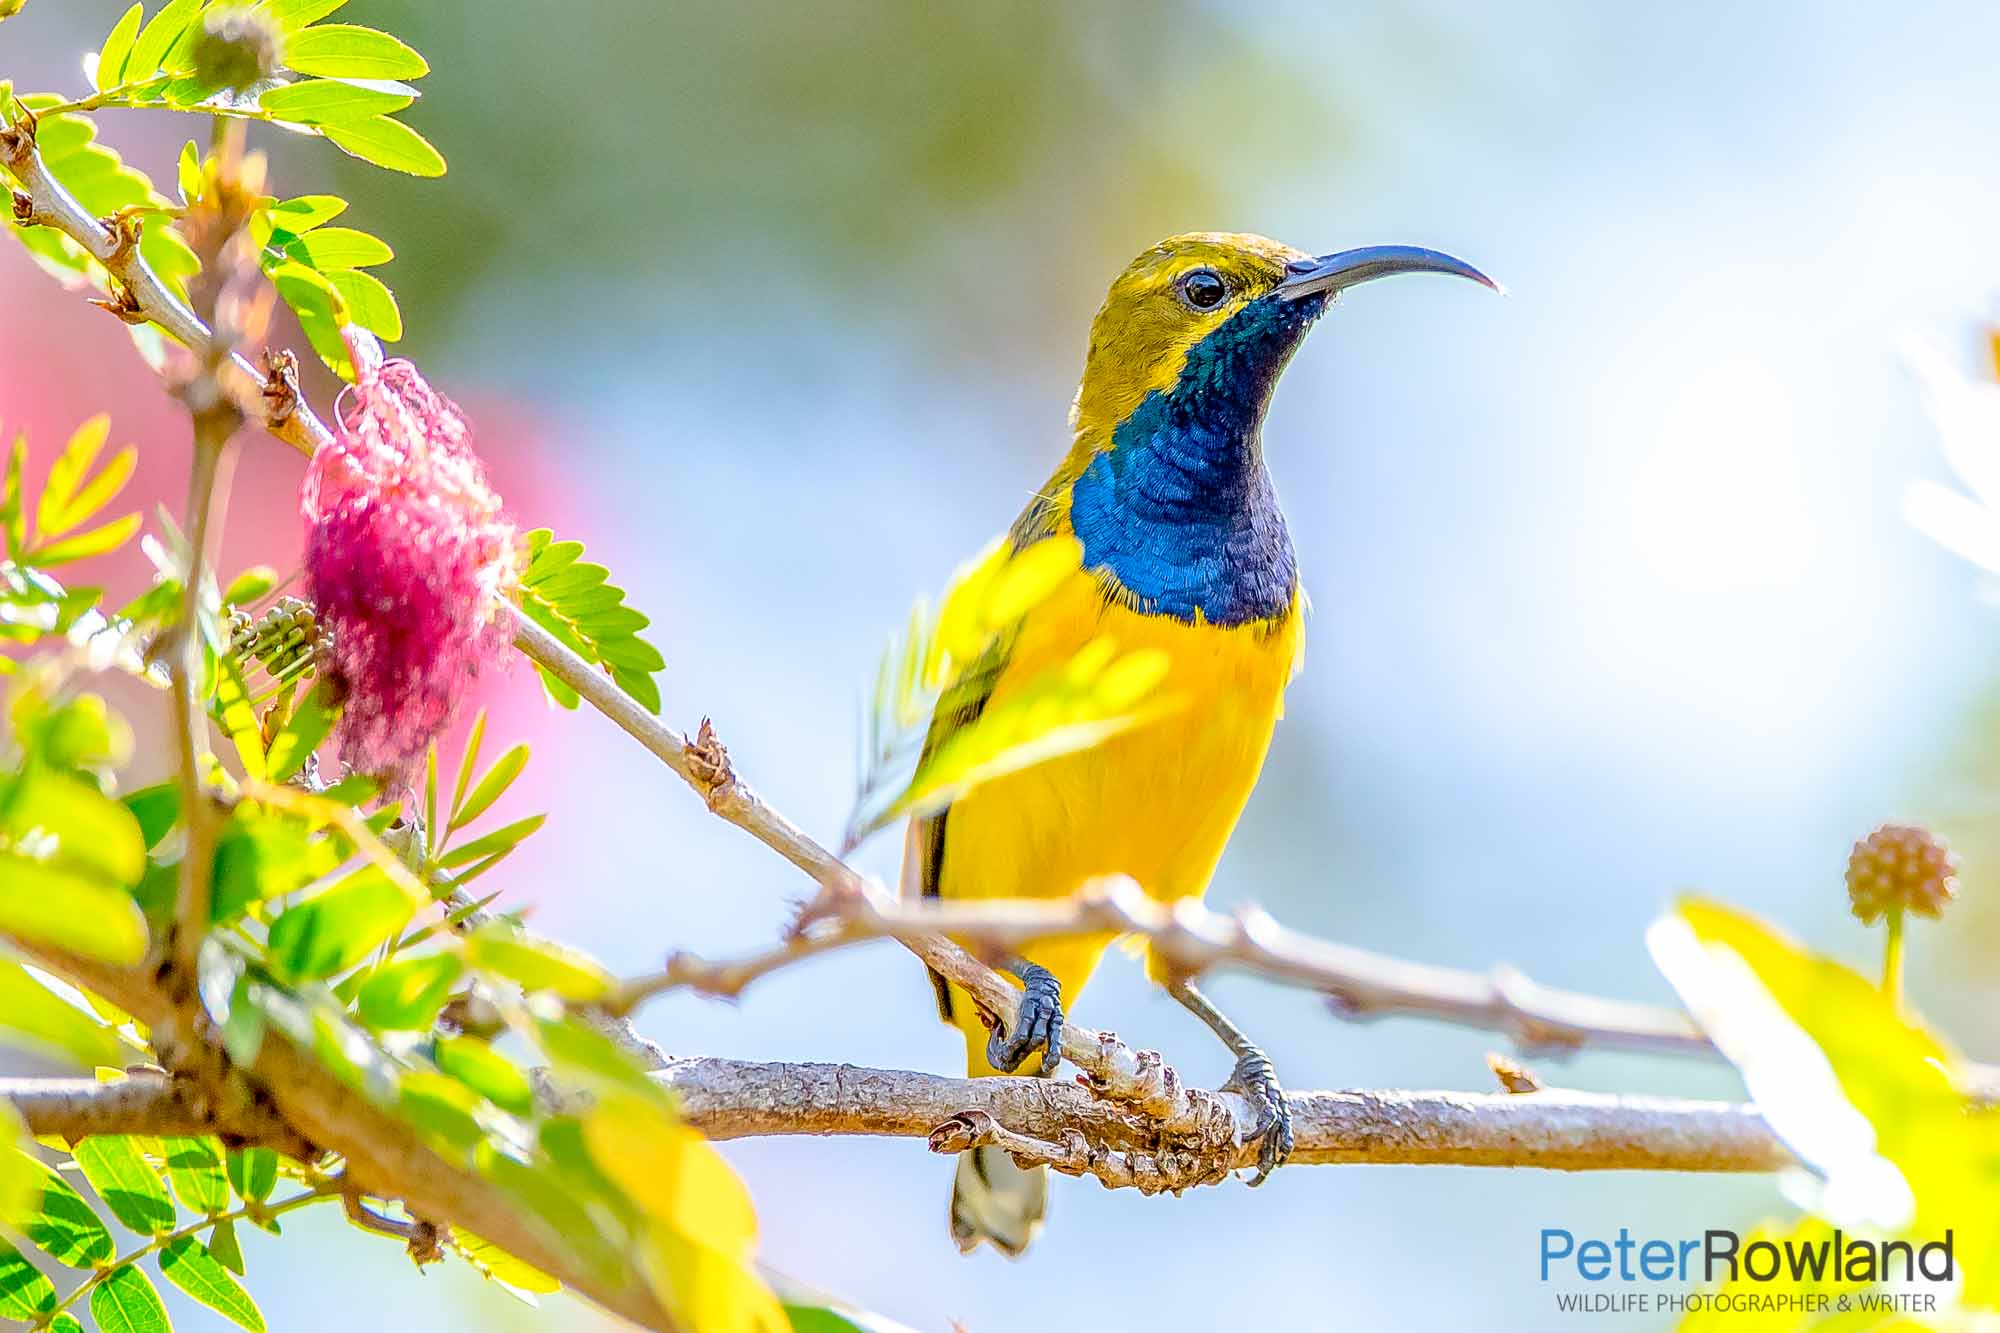 Male Olive-backed Sunbird perched on small branch amongst green and yellow leaves